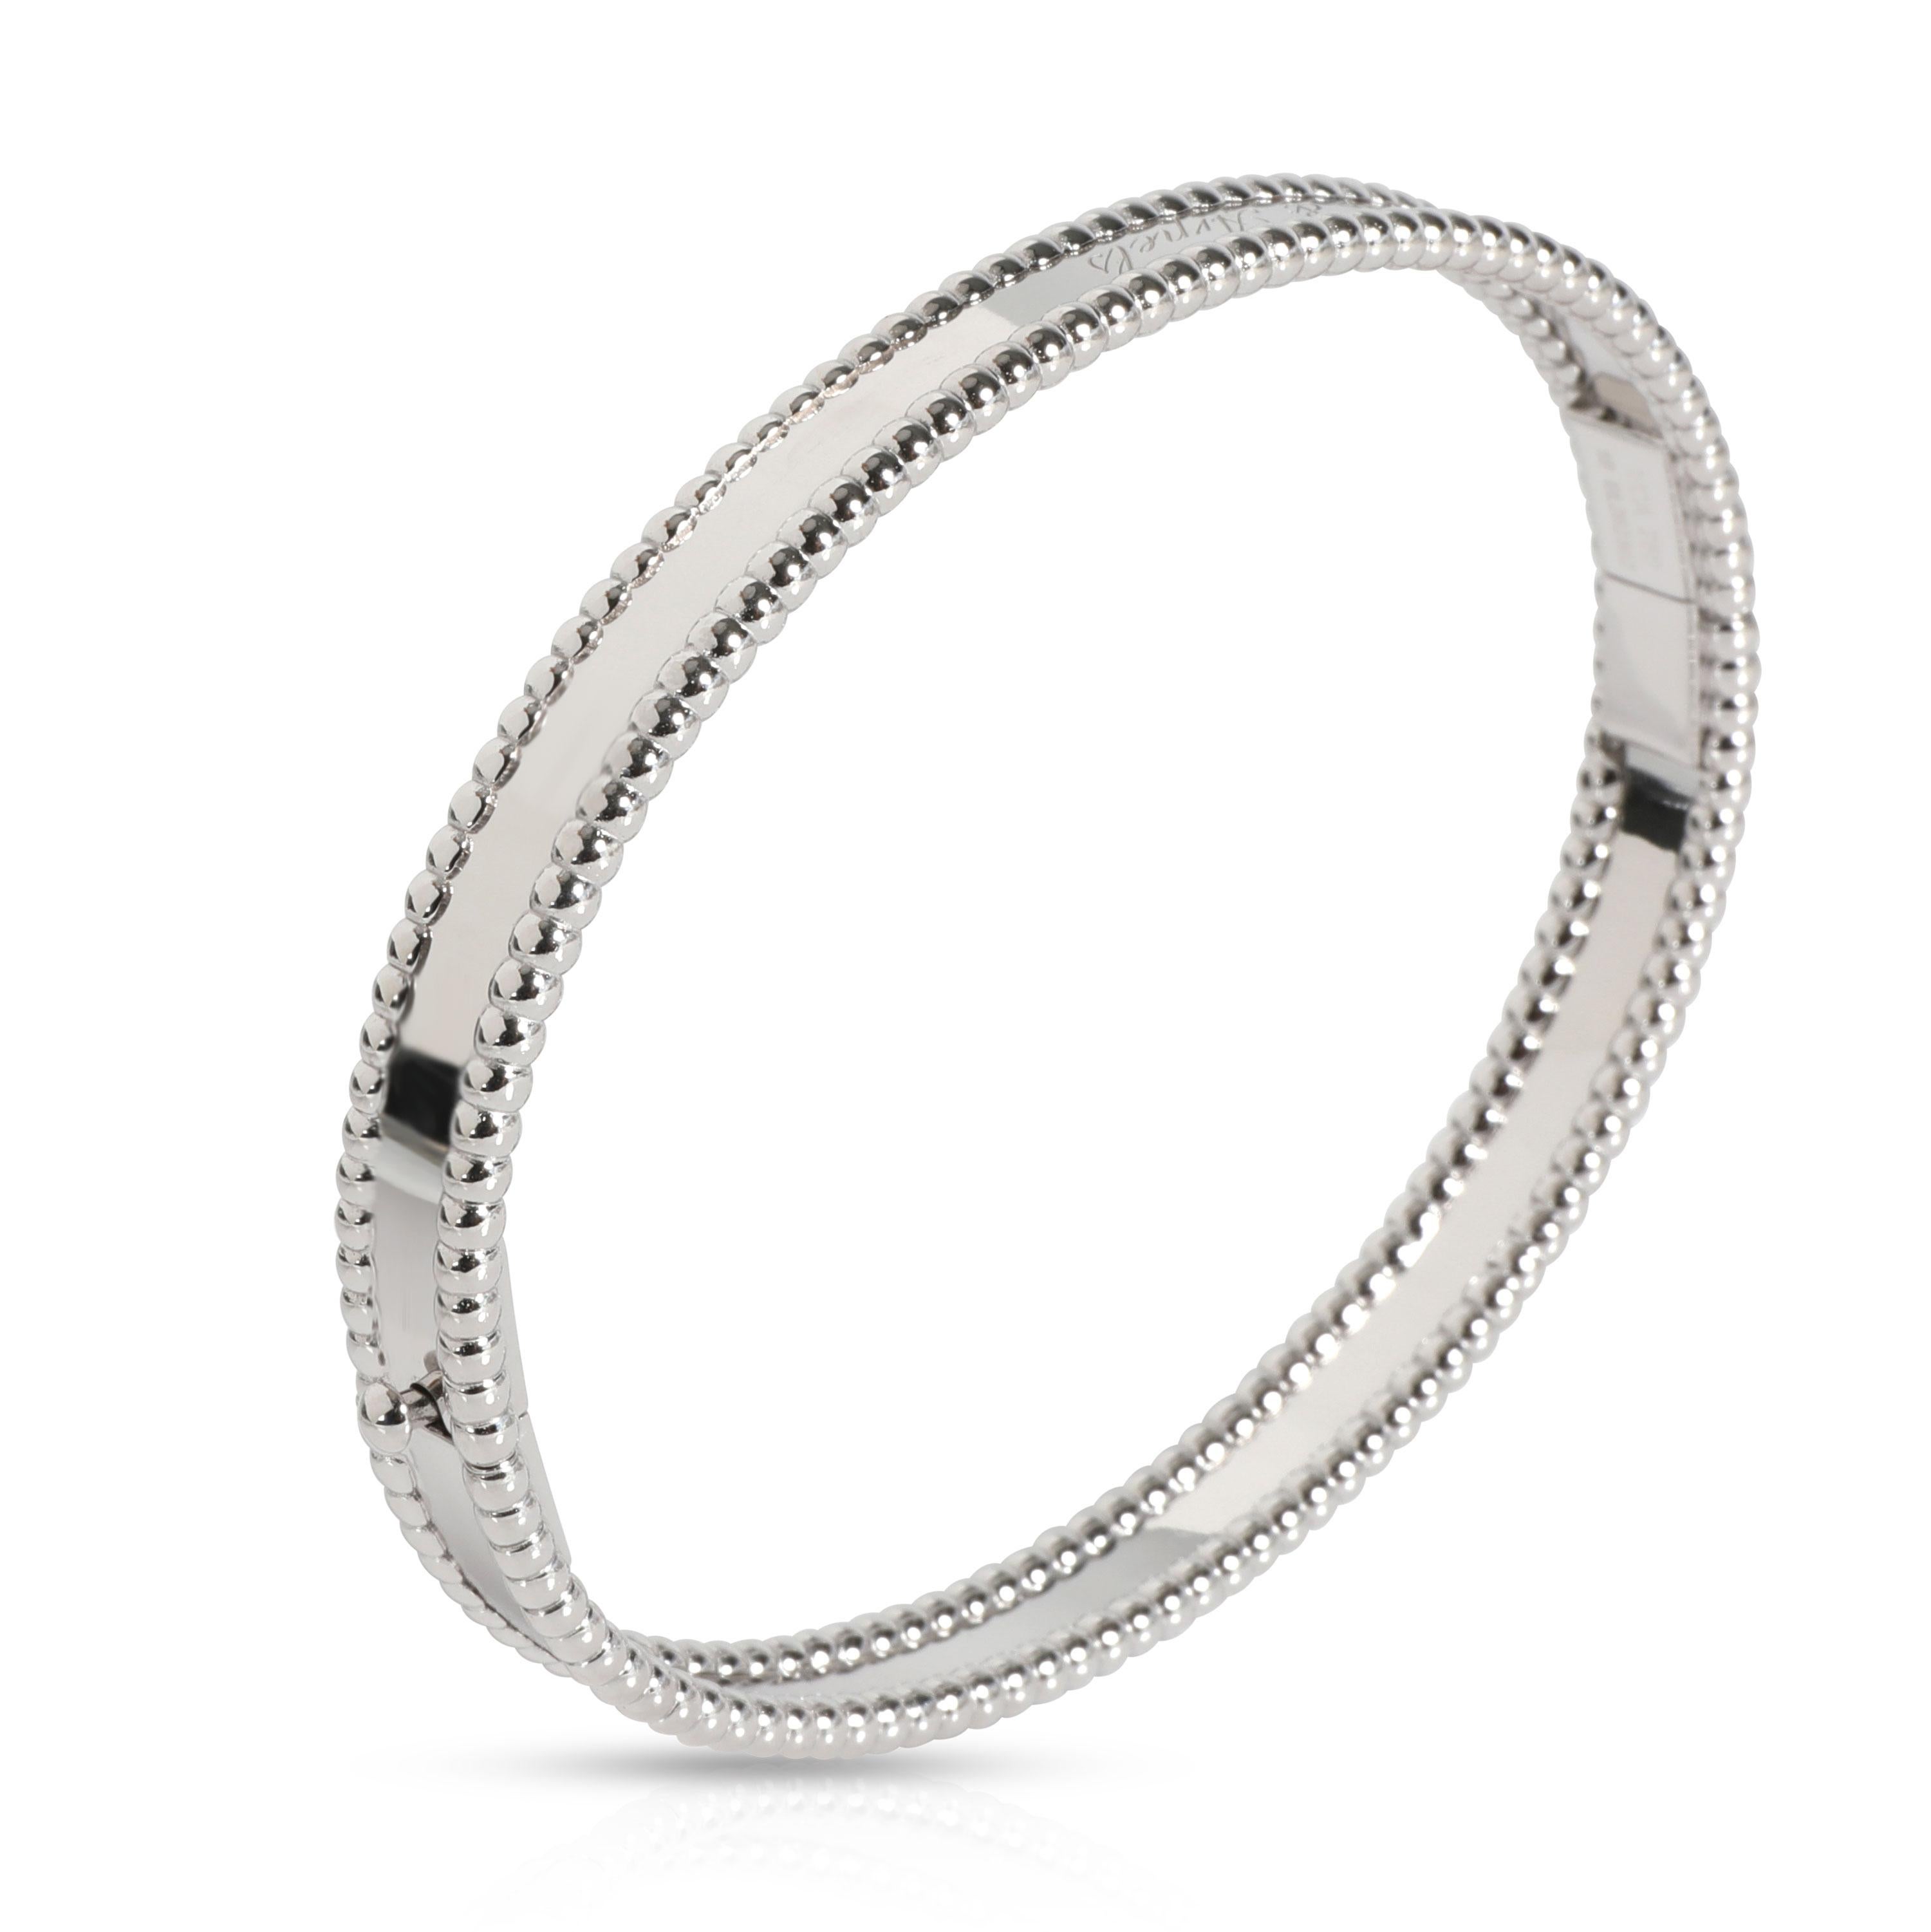 Van Cleef & Arpels Perlee Bracelet in 18K White Gold

PRIMARY DETAILS
SKU: 105218
Listing Title: Van Cleef & Arpels Perlee Bracelet in 18K White Gold
Condition Description: Retails for 6,900 USD. In excellent condition and recently polished by Van